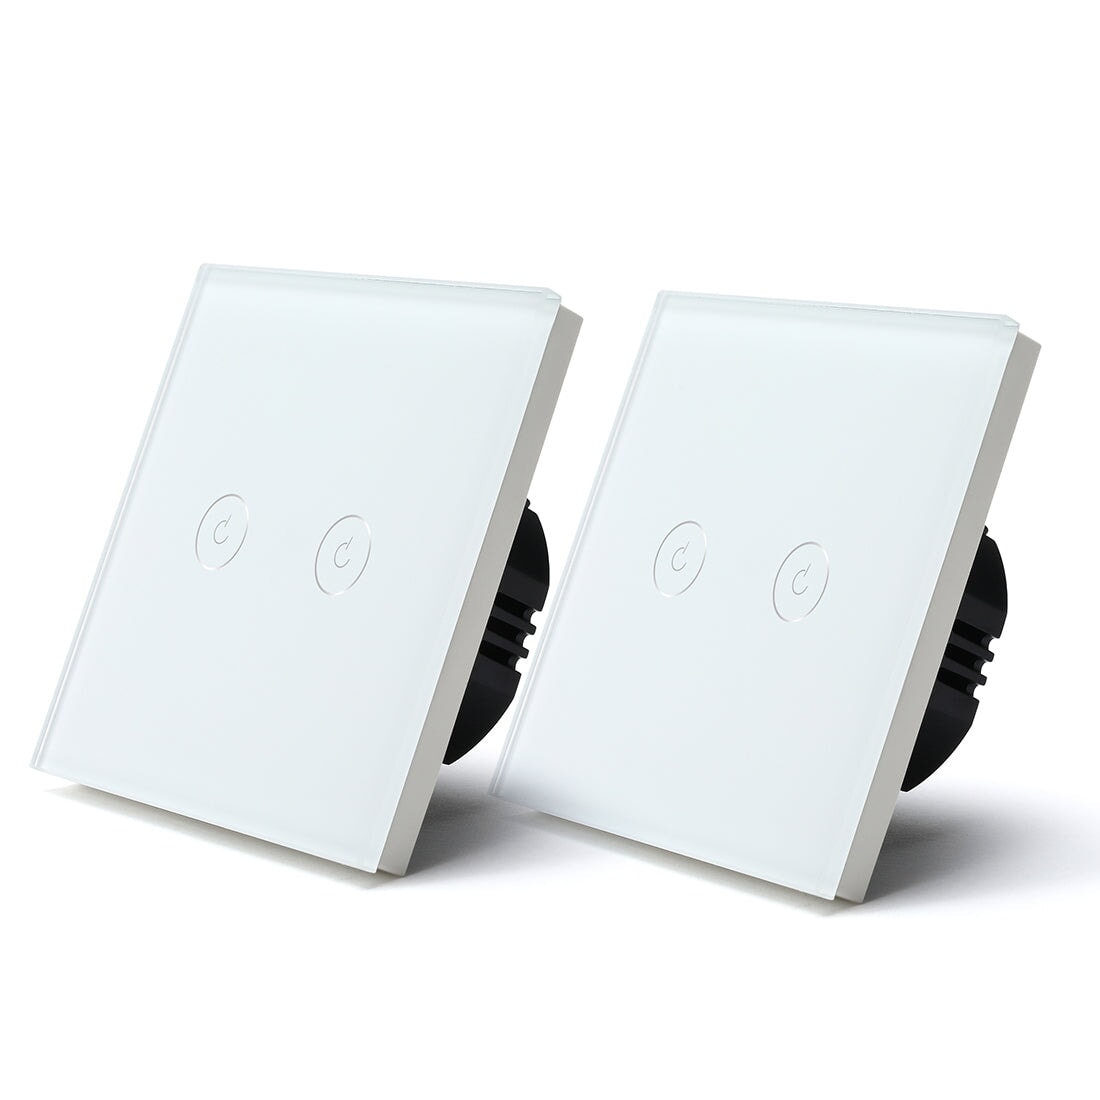 Bseed Smart Wifi Touch Switch 2 Gang 1/2/3 Way 1/2/3 Pcs/Pack Wall Plates & Covers Bseedswitch White 2Pcs/Pack 